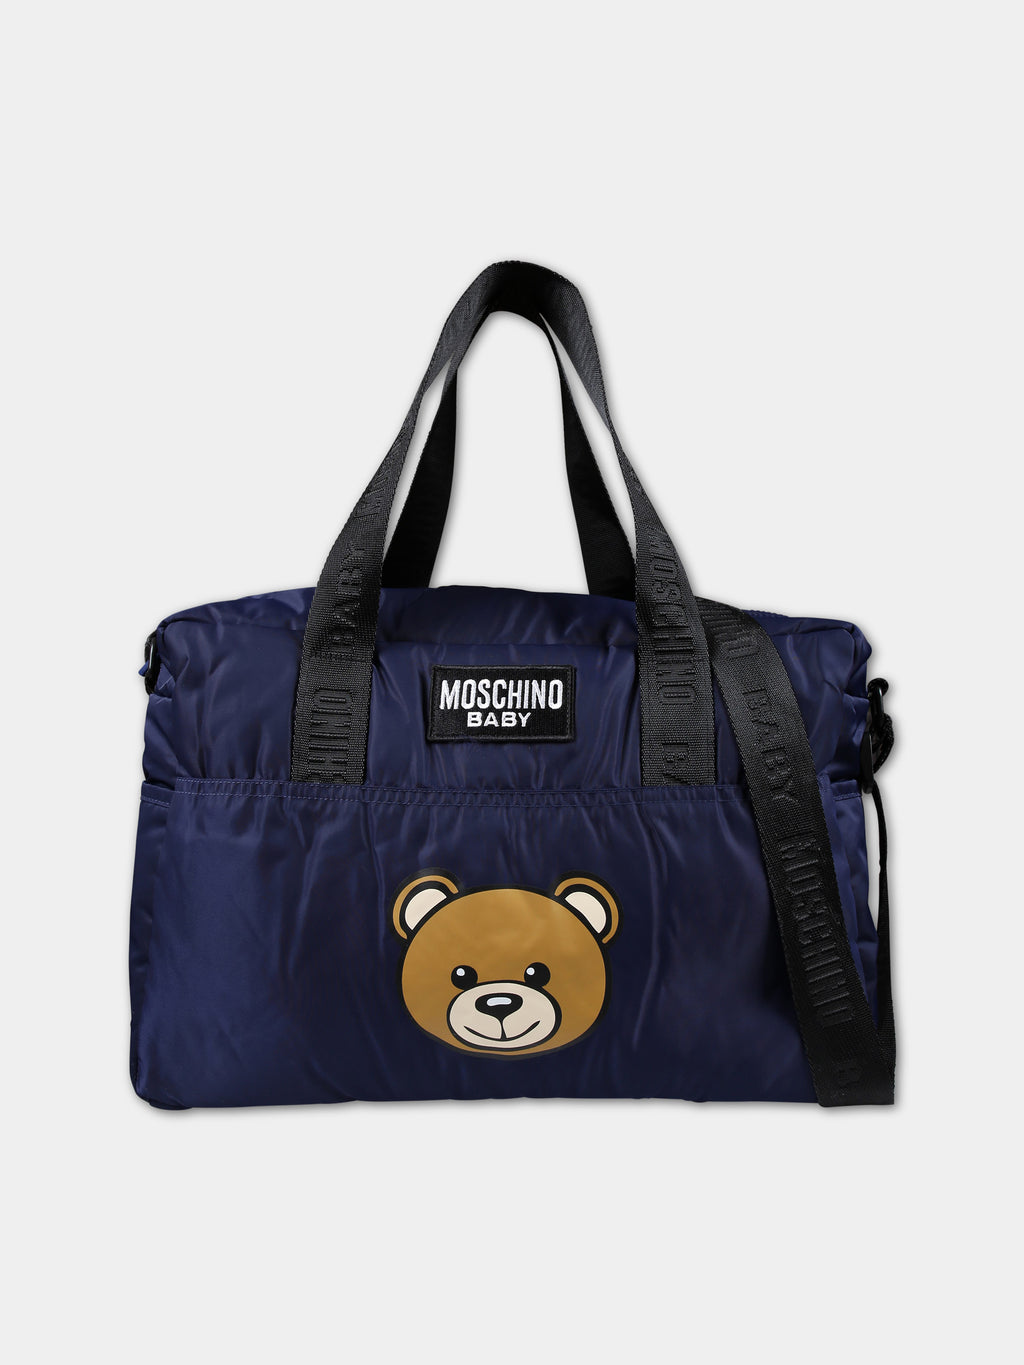 Blue mom bag for babies with Teddy bear and logo